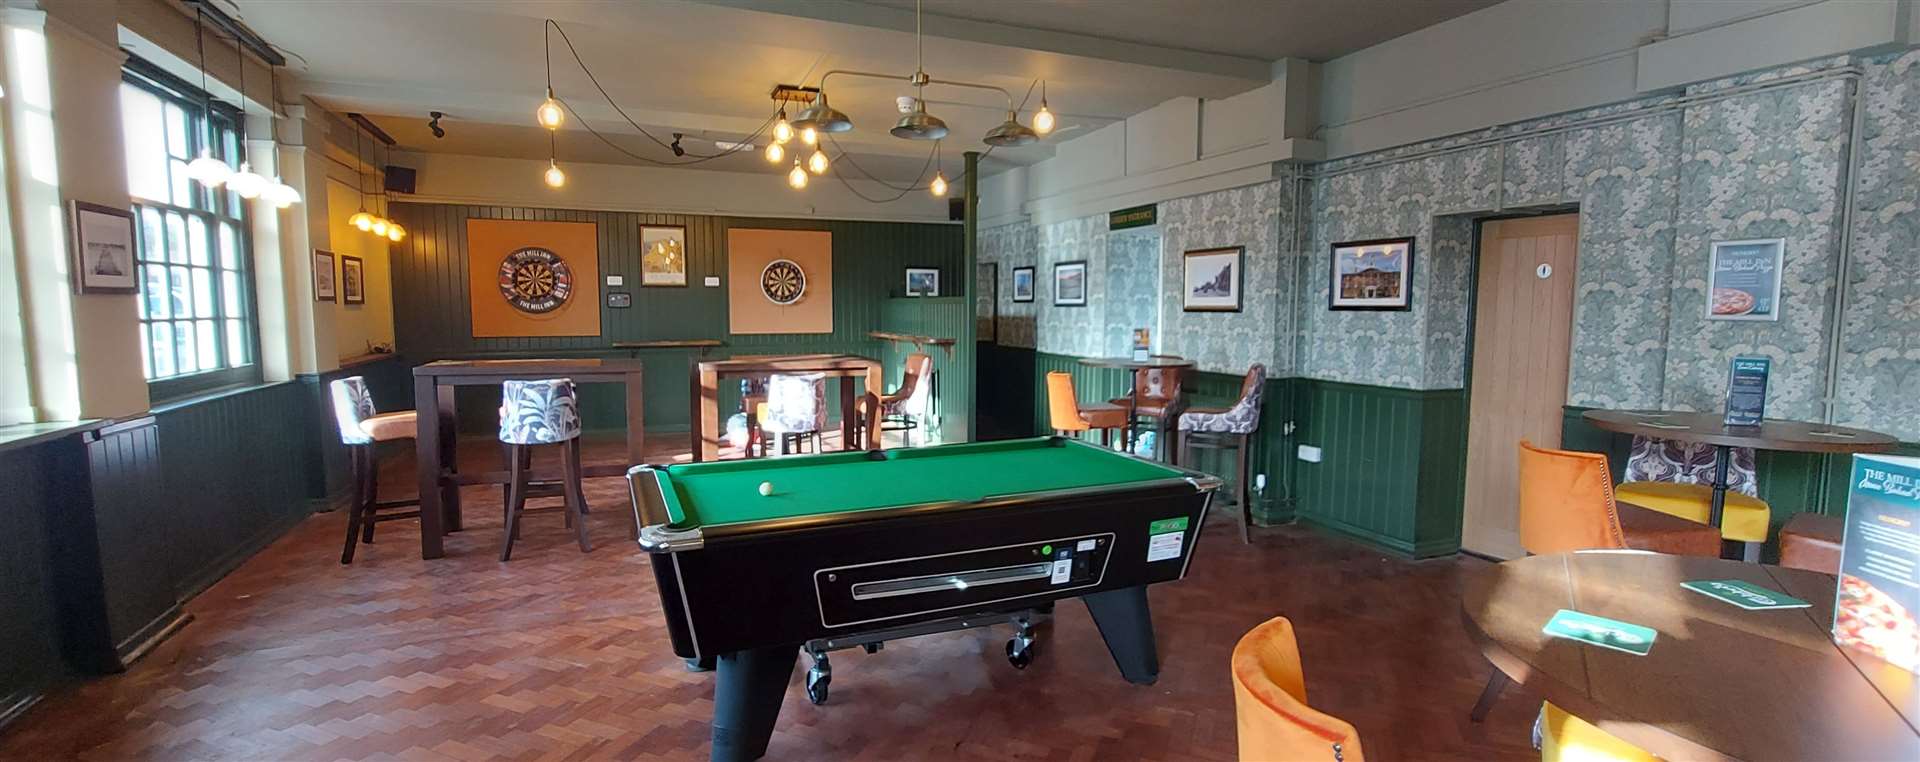 Bill Pennell bought the pub earlier this year and wanted to give it a ‘fresh look’